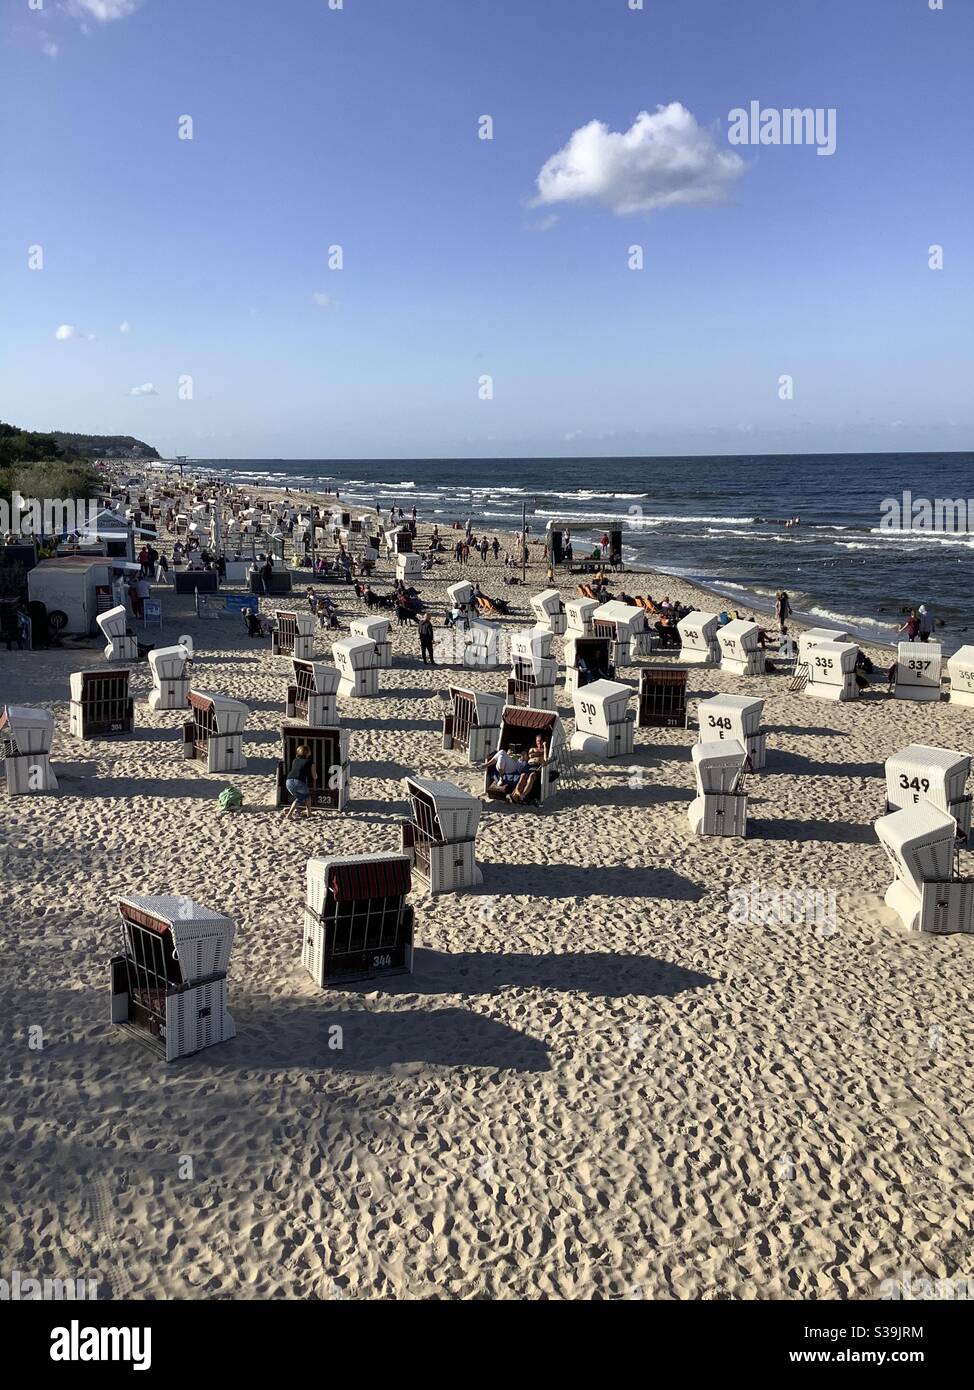 Wicker beach chairs on the beach of Heringsdorf, imperial baths, Baltic Sea, Usedom, Mecklenburg Vorpommern, Germany, Europe Stock Photo